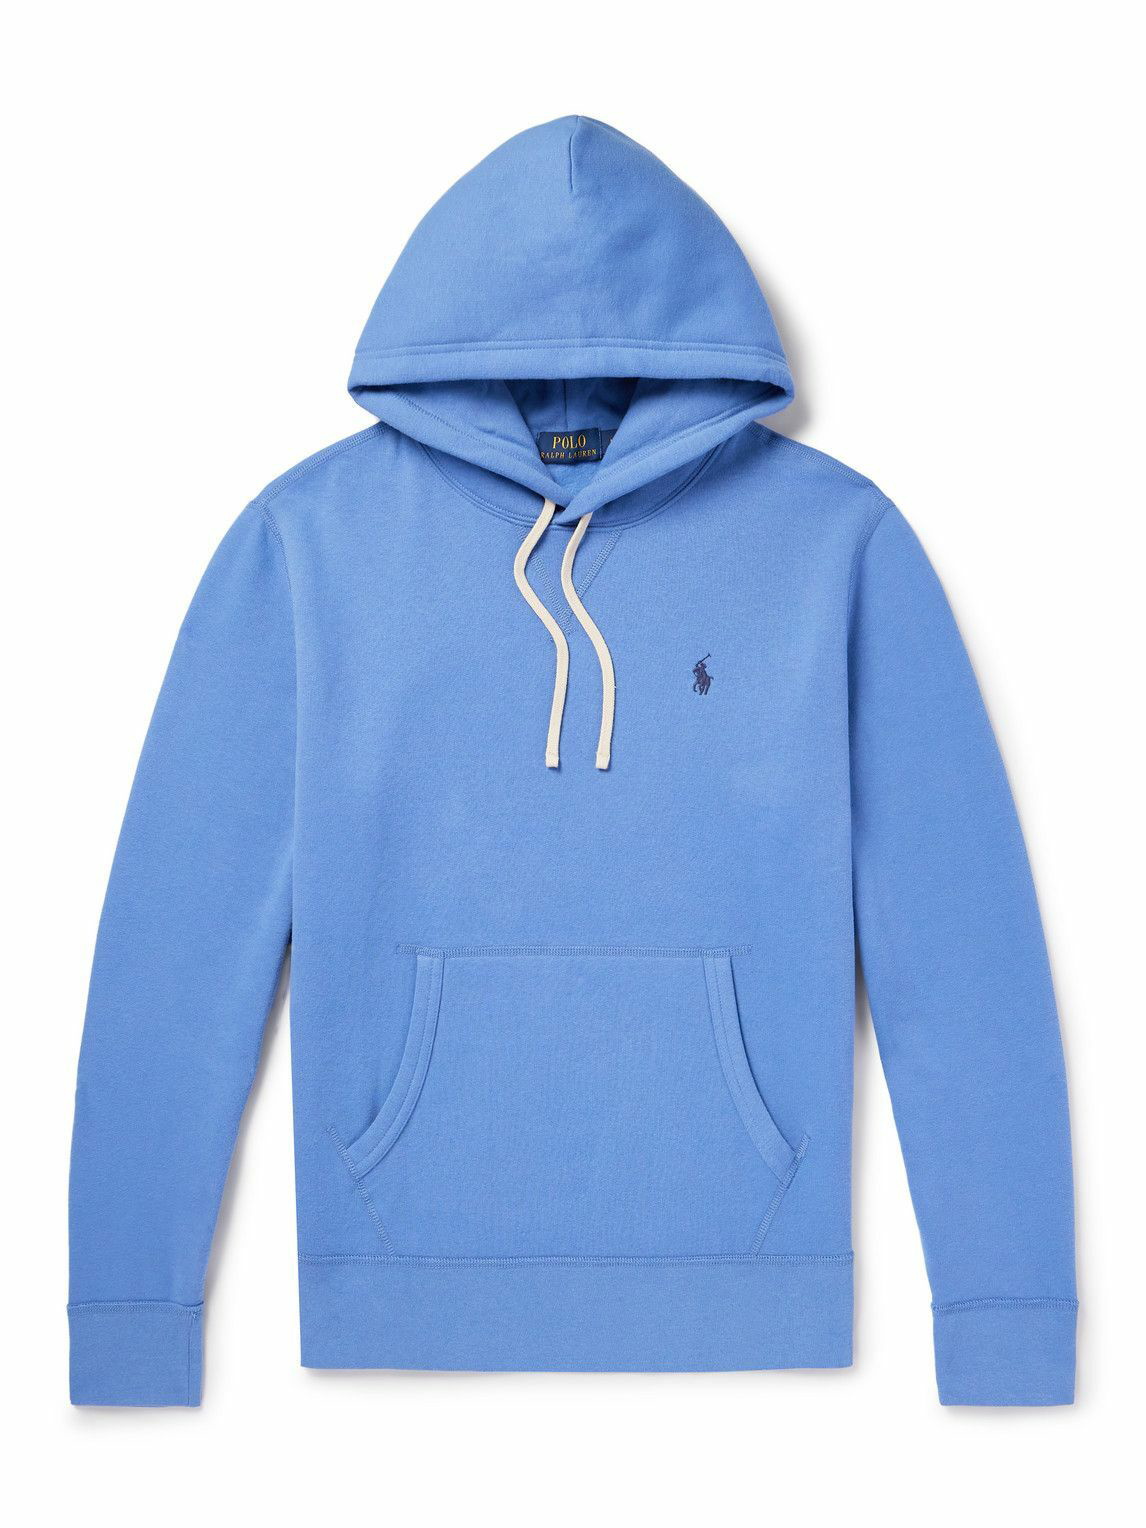 Polo Ralph Lauren - Logo-Embroidered Cotton-Jersey Hoodie - Blue Polo ...